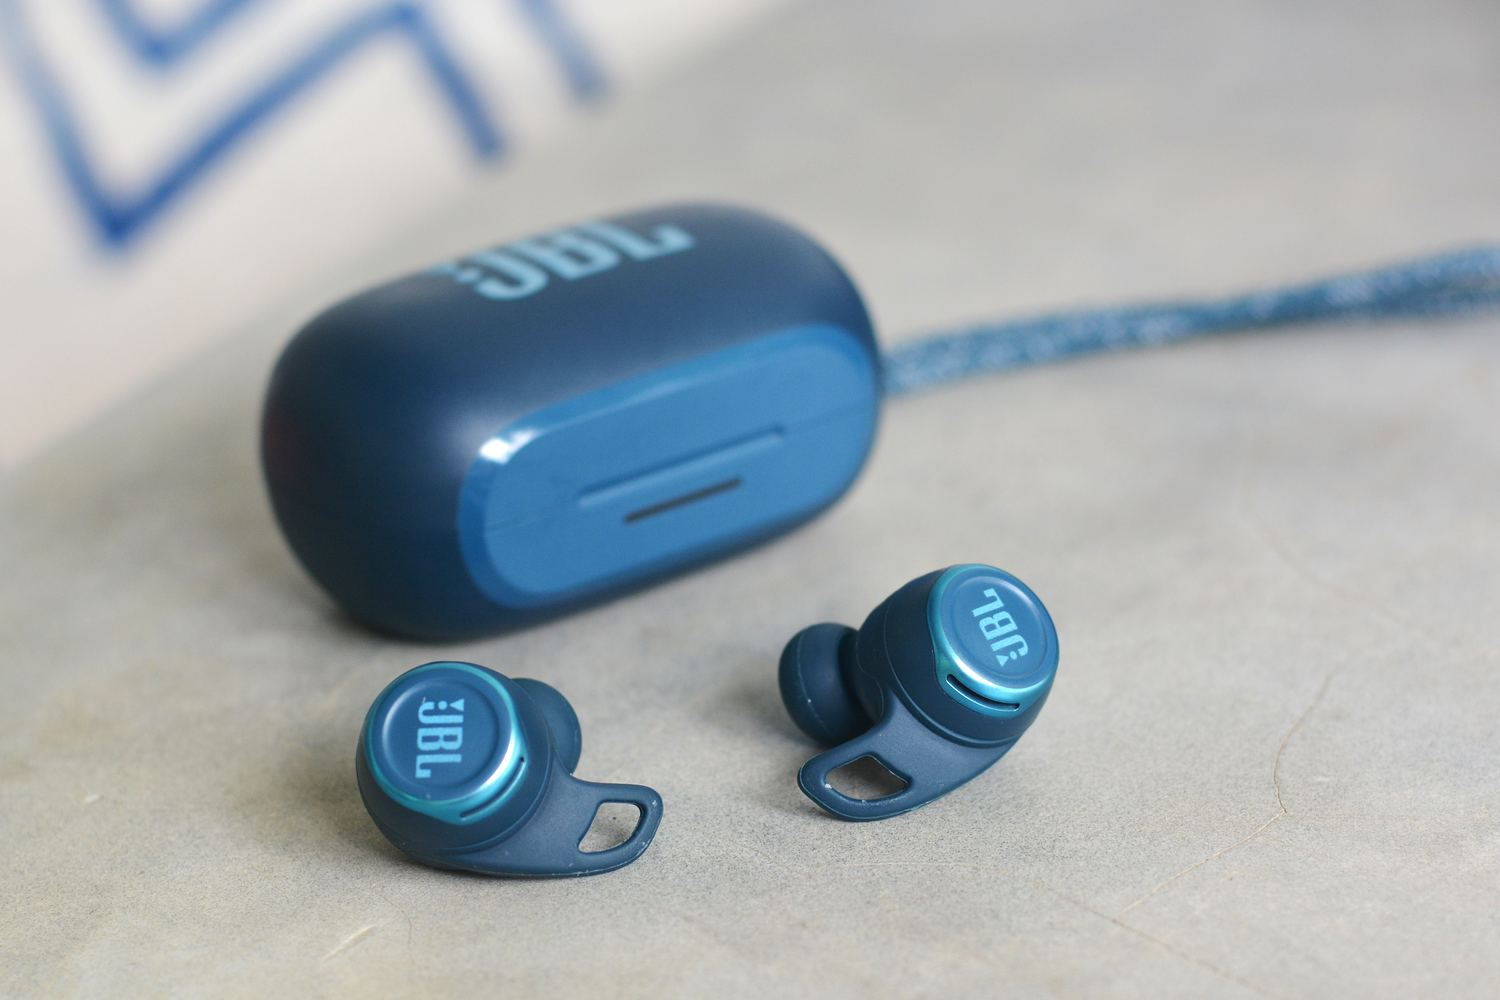 JBL Reflect Pro noise-cancelling sports earbuds